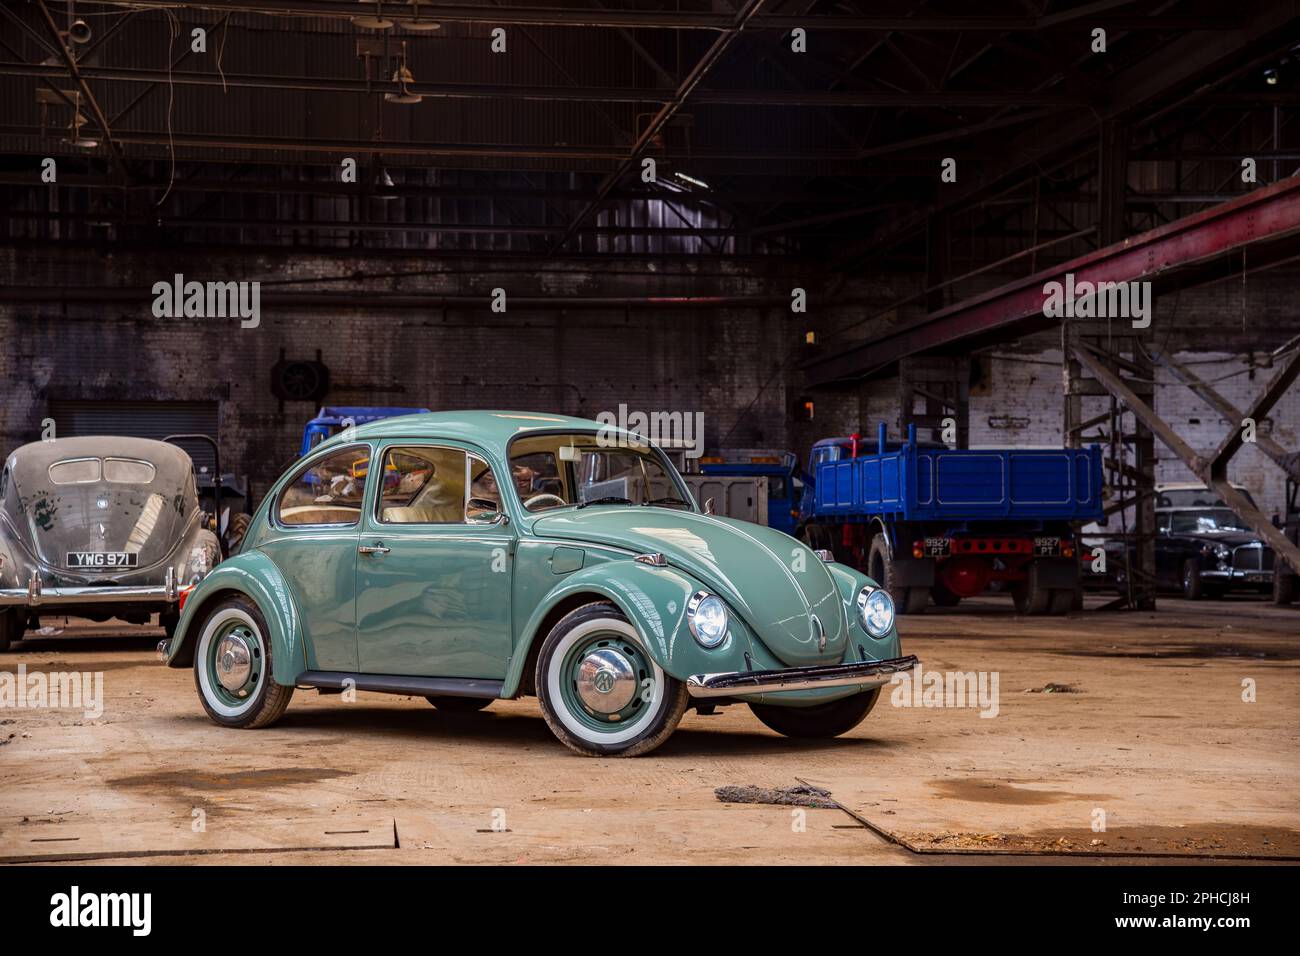 Green Volvkswagen Beetle with white walled tyres parked in an old engineering works Stock Photo